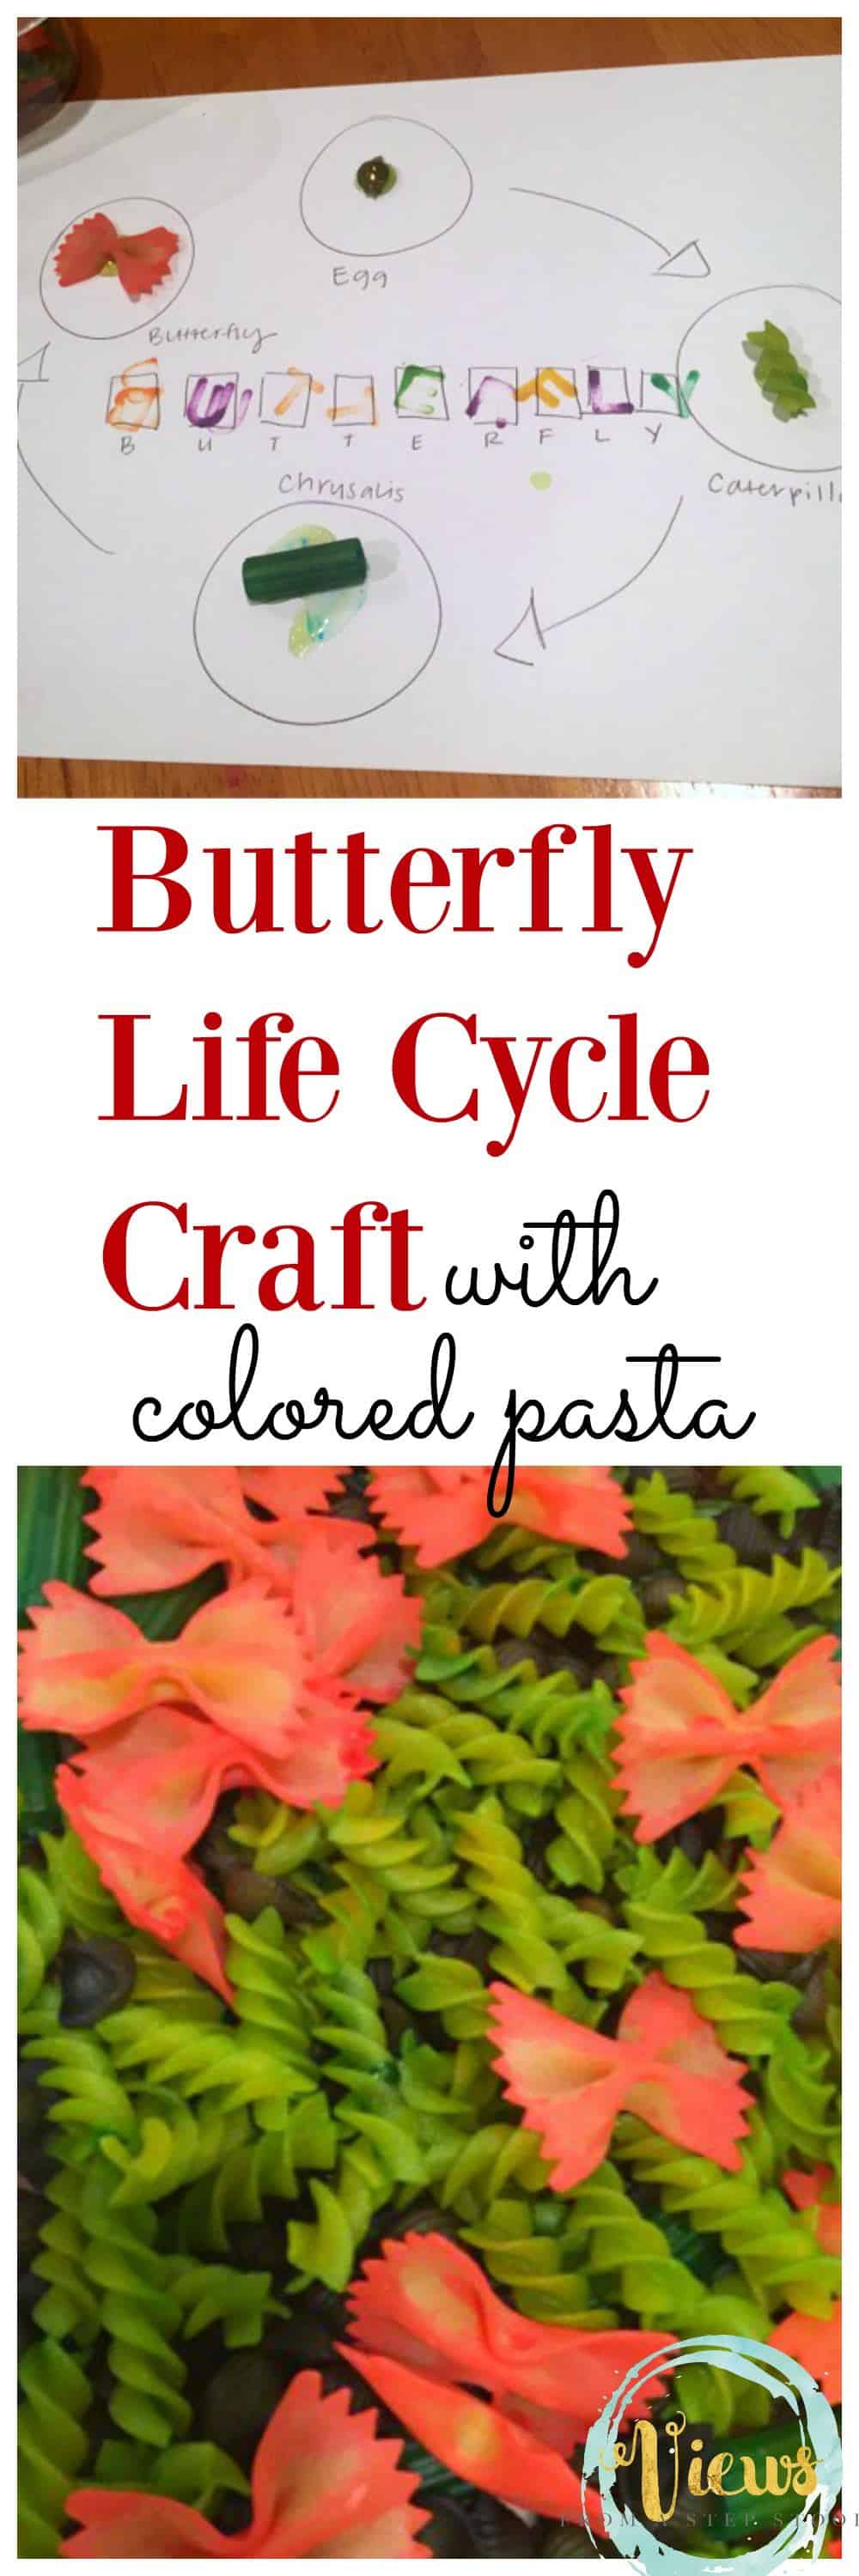 Butterfly Life Cycle Craft with Pasta